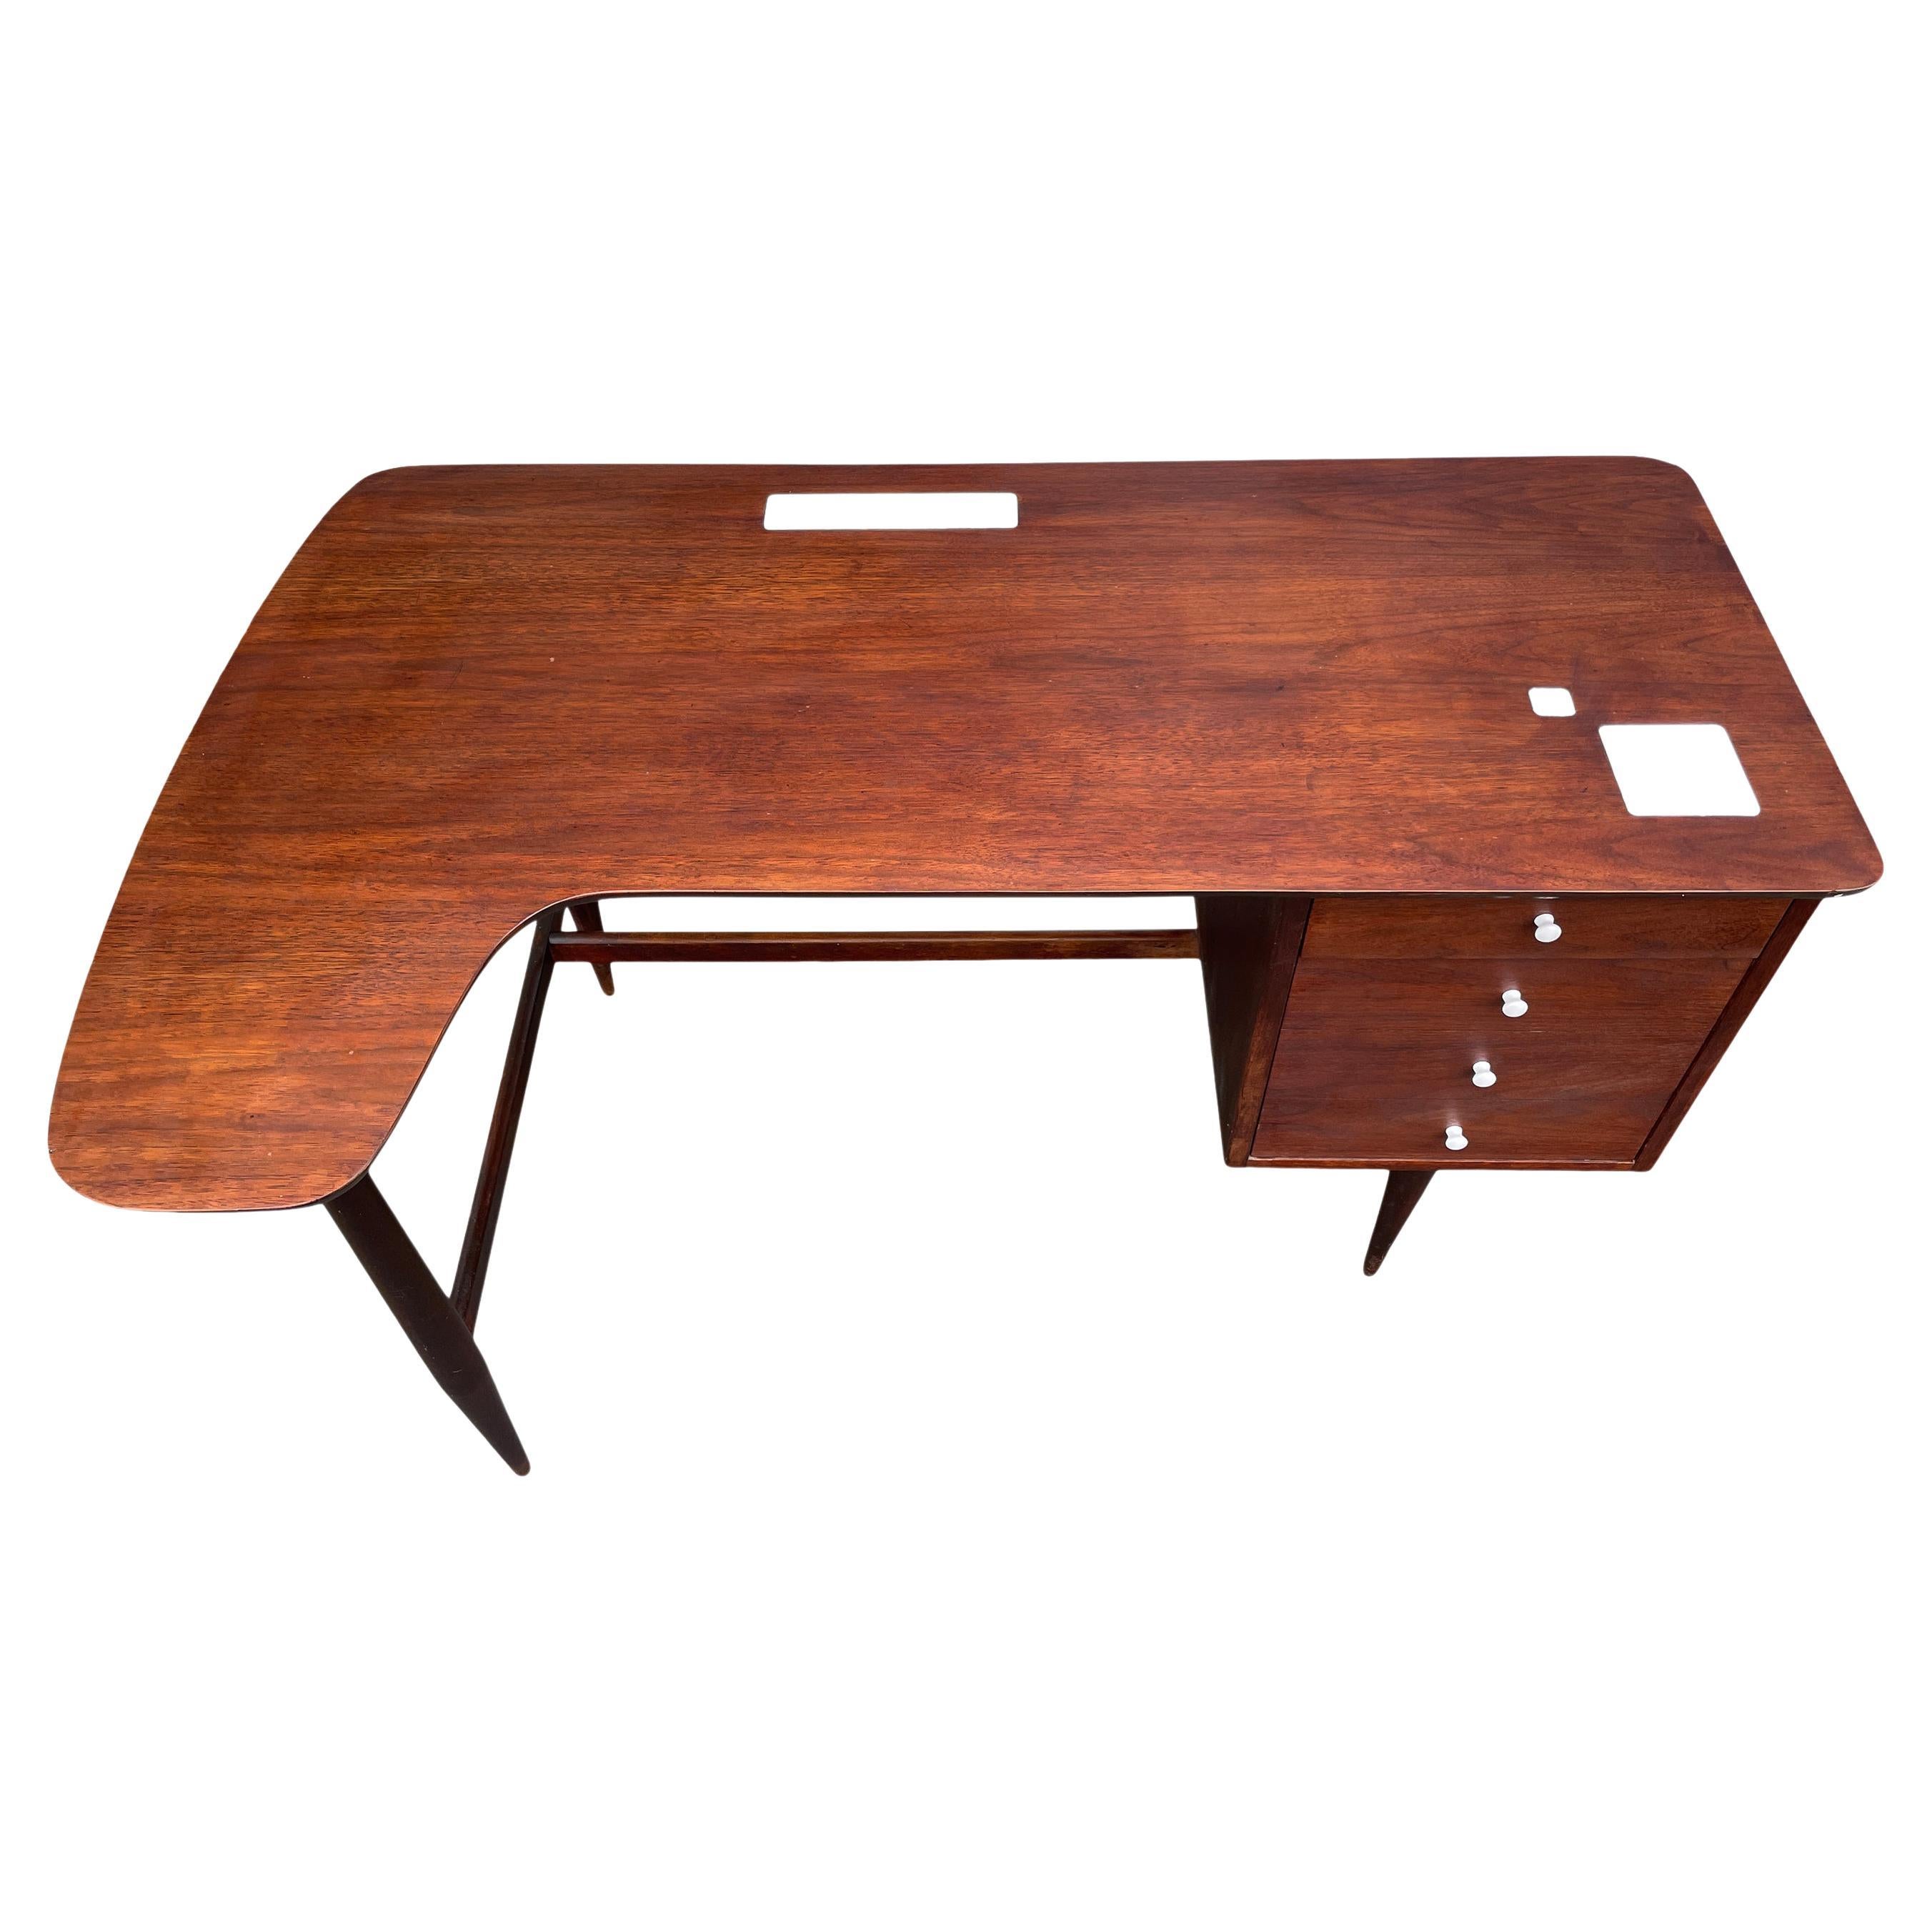 Mid-Century Modern Walnut Curved Top Desk with 2 Drawers Ceramic Tiles & Knobs